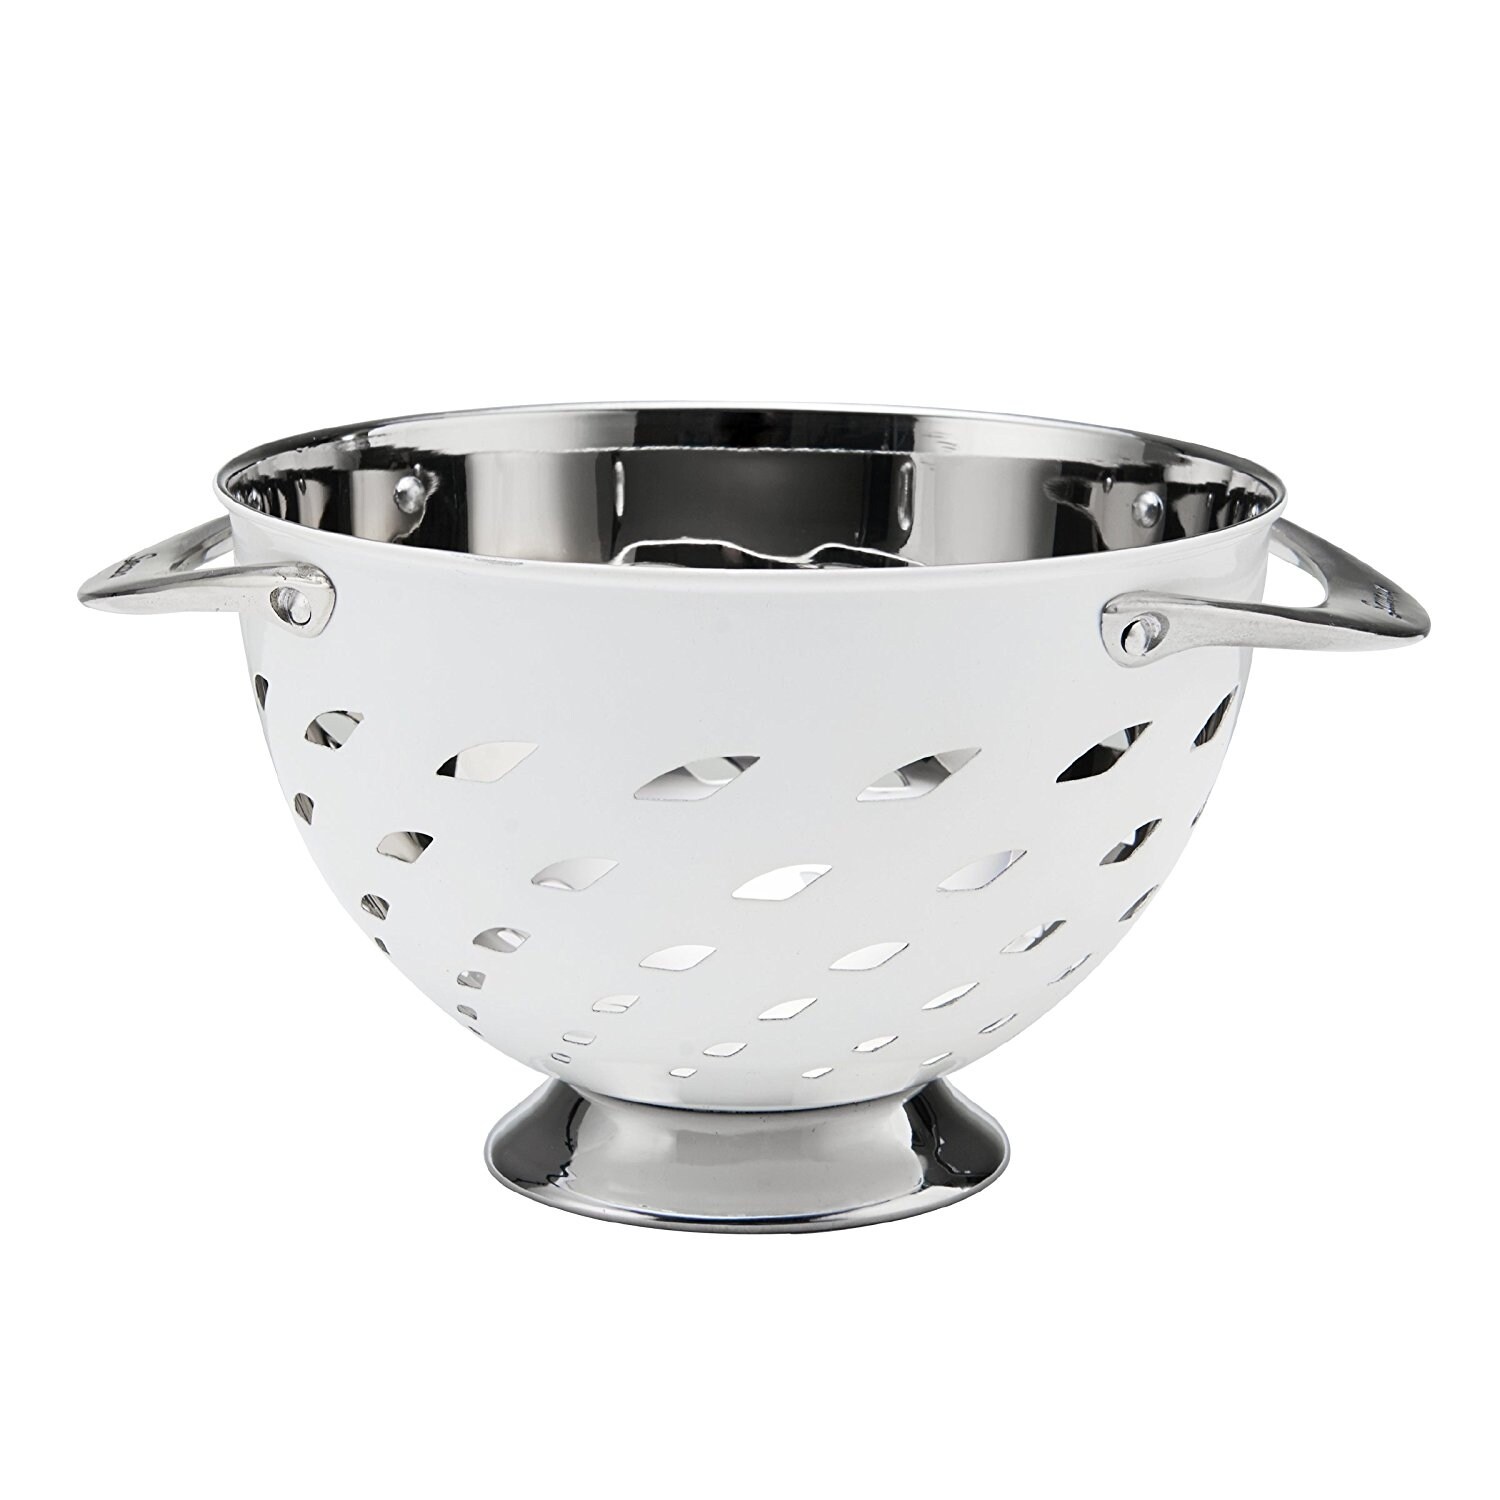 https://ak1.ostkcdn.com/images/products/is/images/direct/f3516623c51de5684ecf981e739c973b880f2984/Savora-Small-Stainless-Steel-Berry-Colander%2C-1.5-Quart.jpg